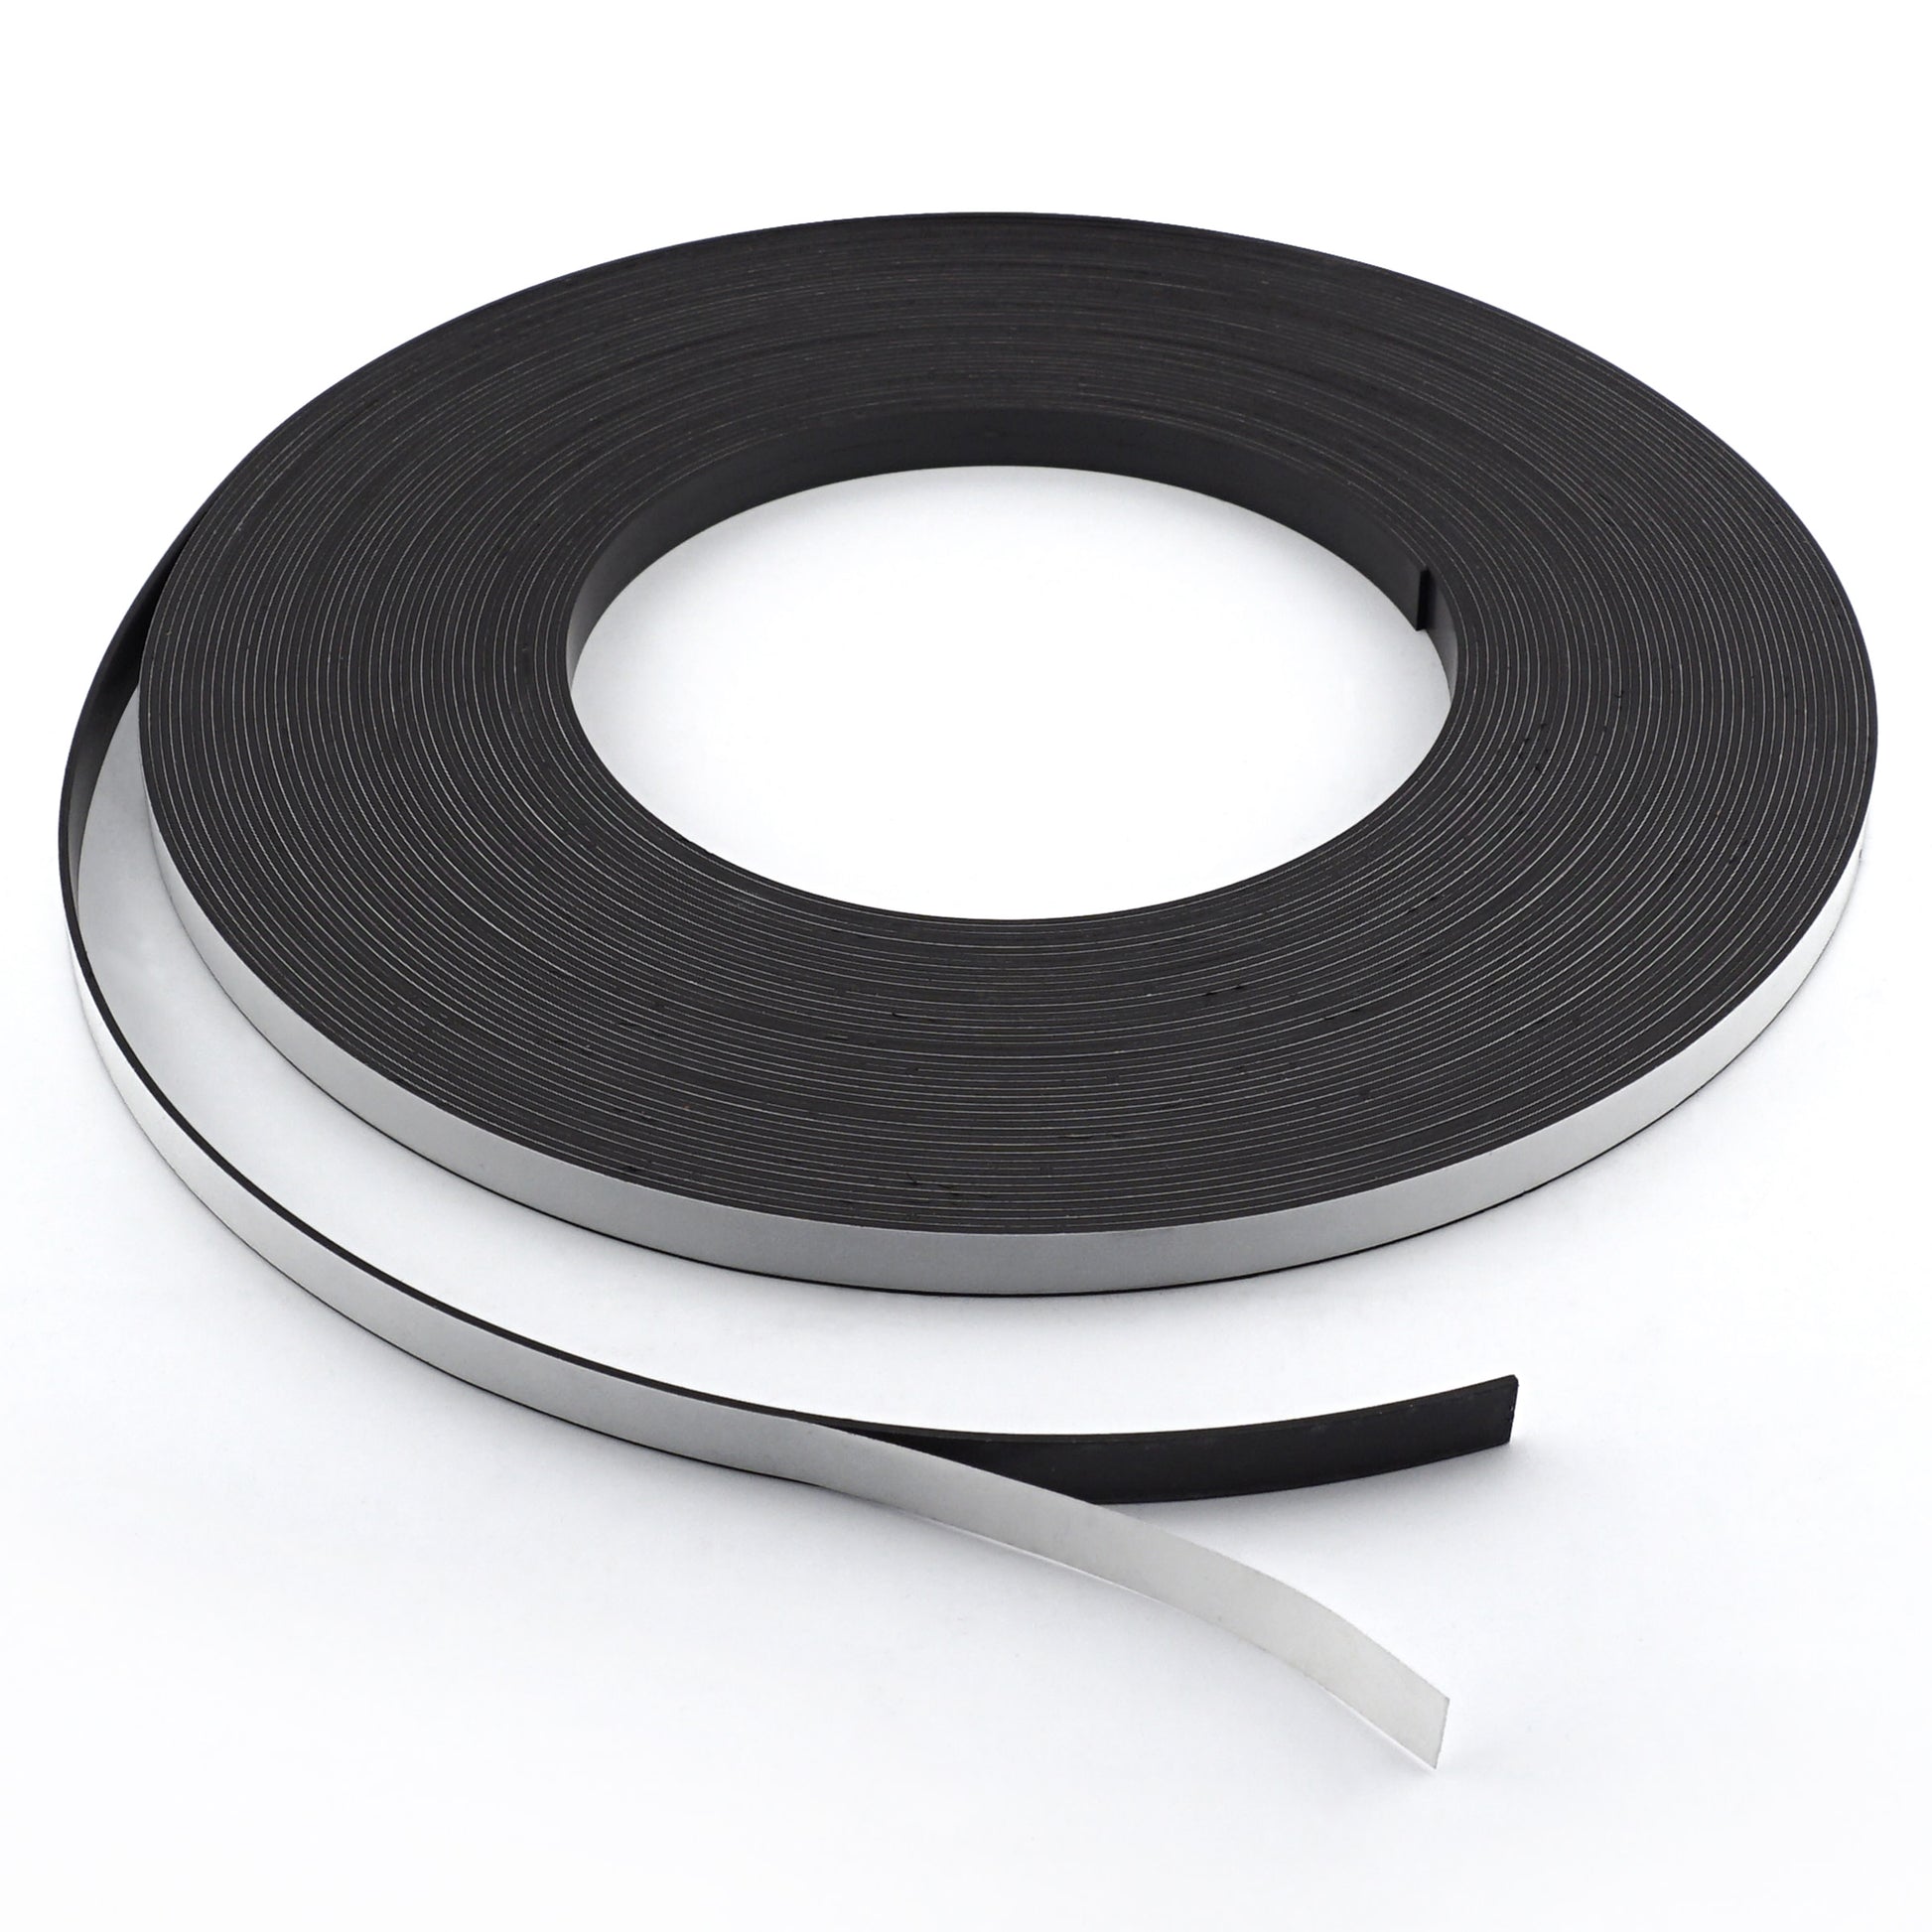 Load image into Gallery viewer, ZG10A-A/SB Flexible Magnetic Strip with Adhesive - 45 Degree Angle View